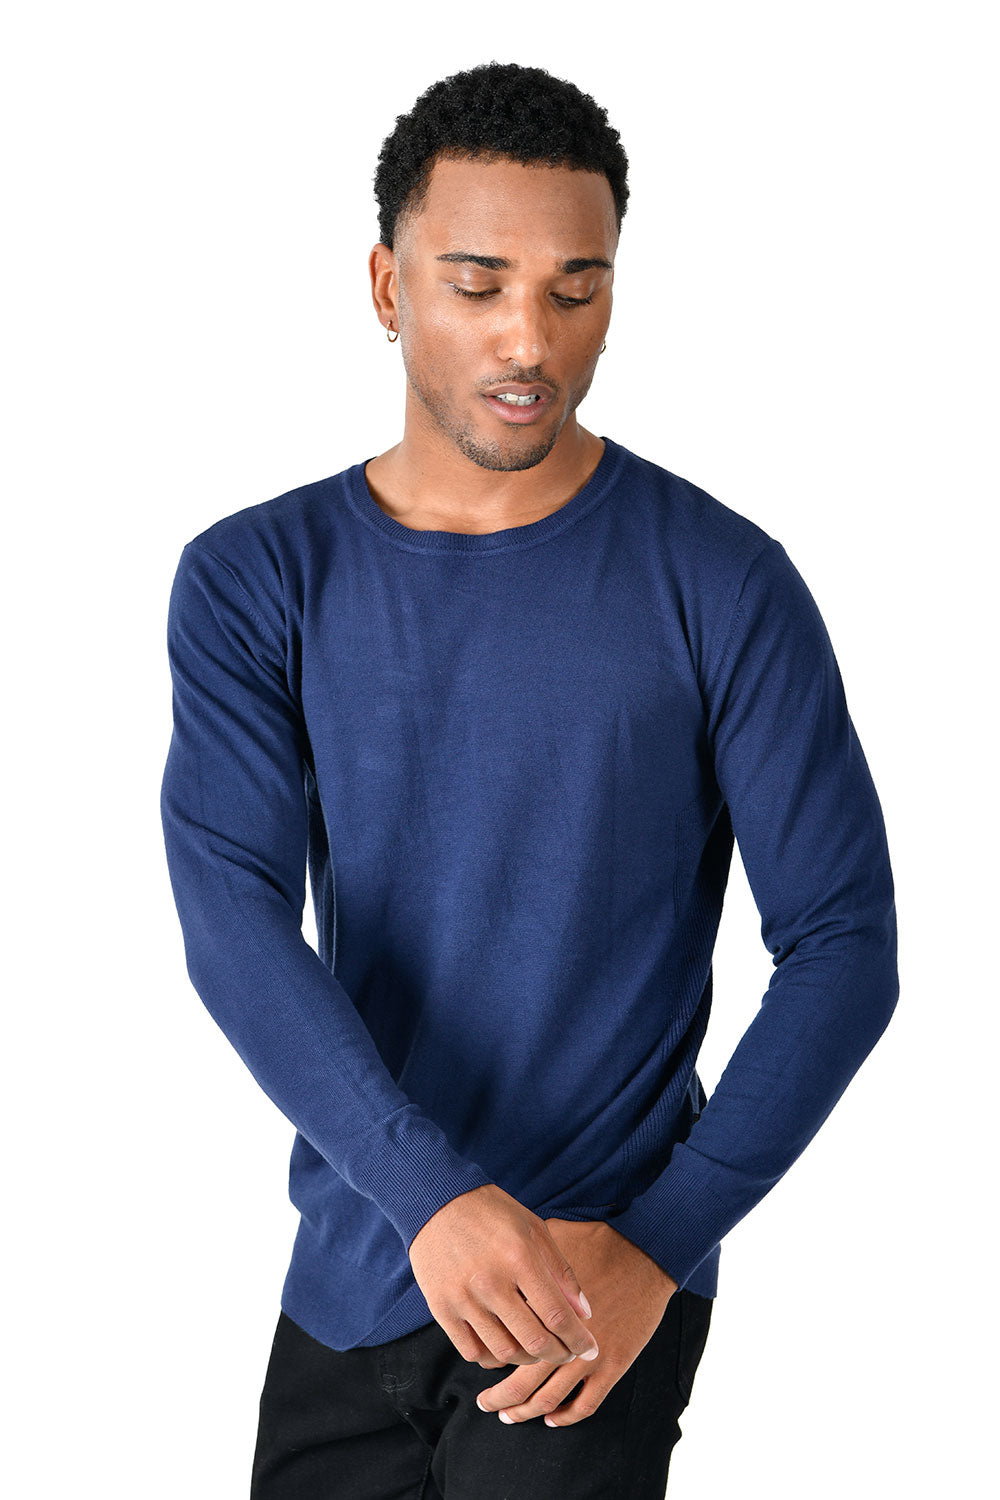 BARABAS Men's Crew Neck Ribbed Solid Color Basic Sweater LS2101 Navy